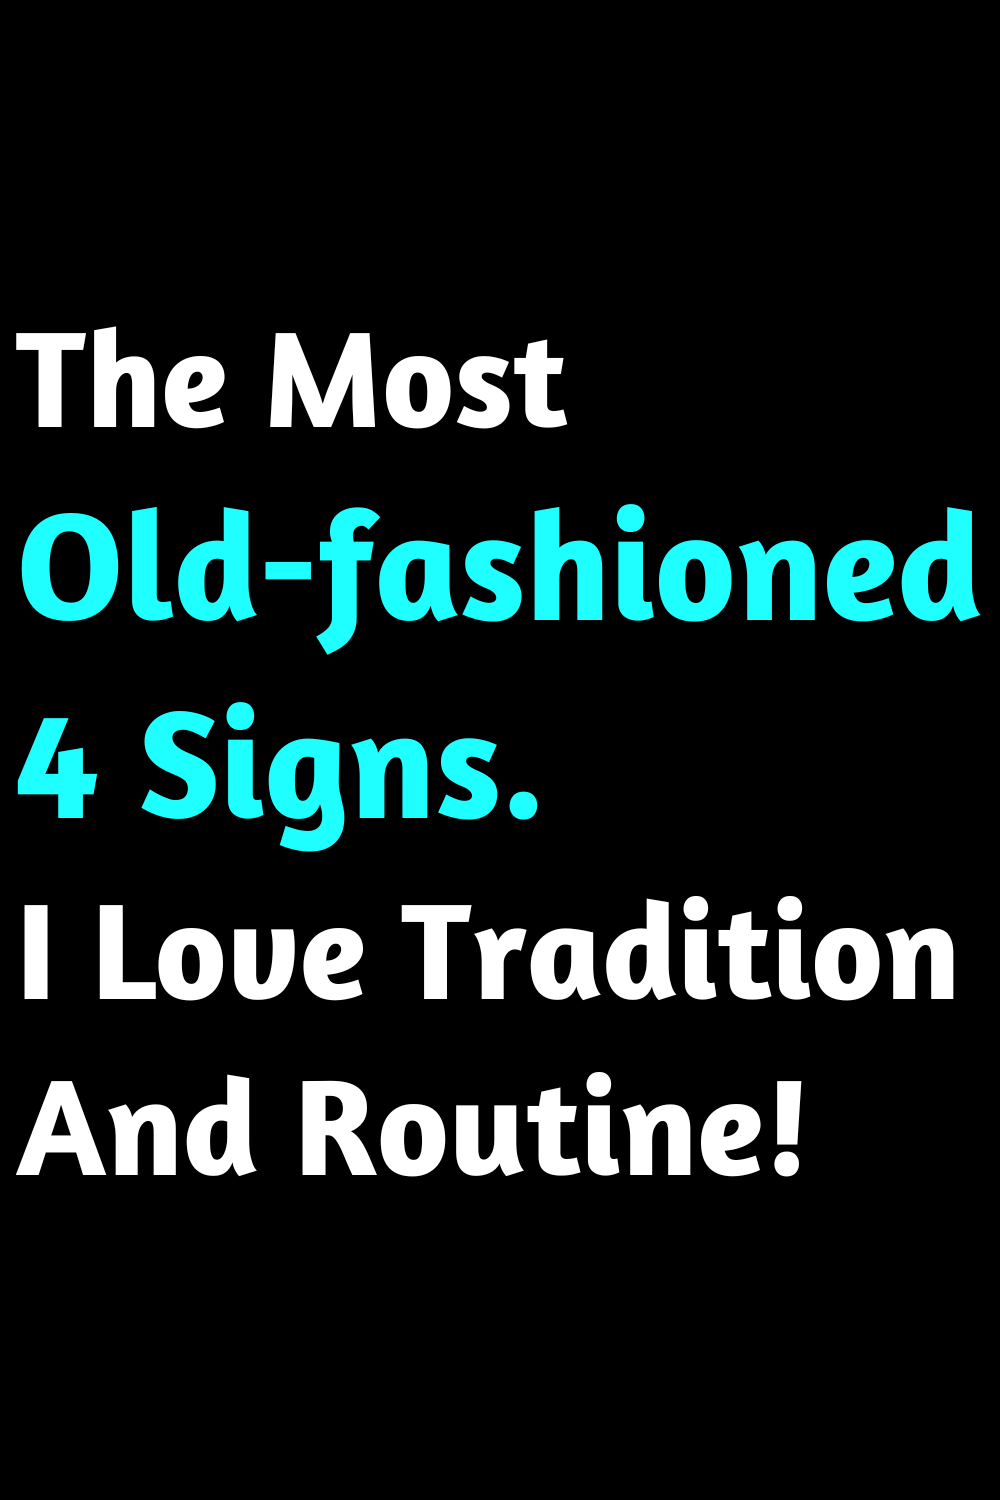 The Most Old-fashioned 4 Signs. I Love Tradition And Routine!